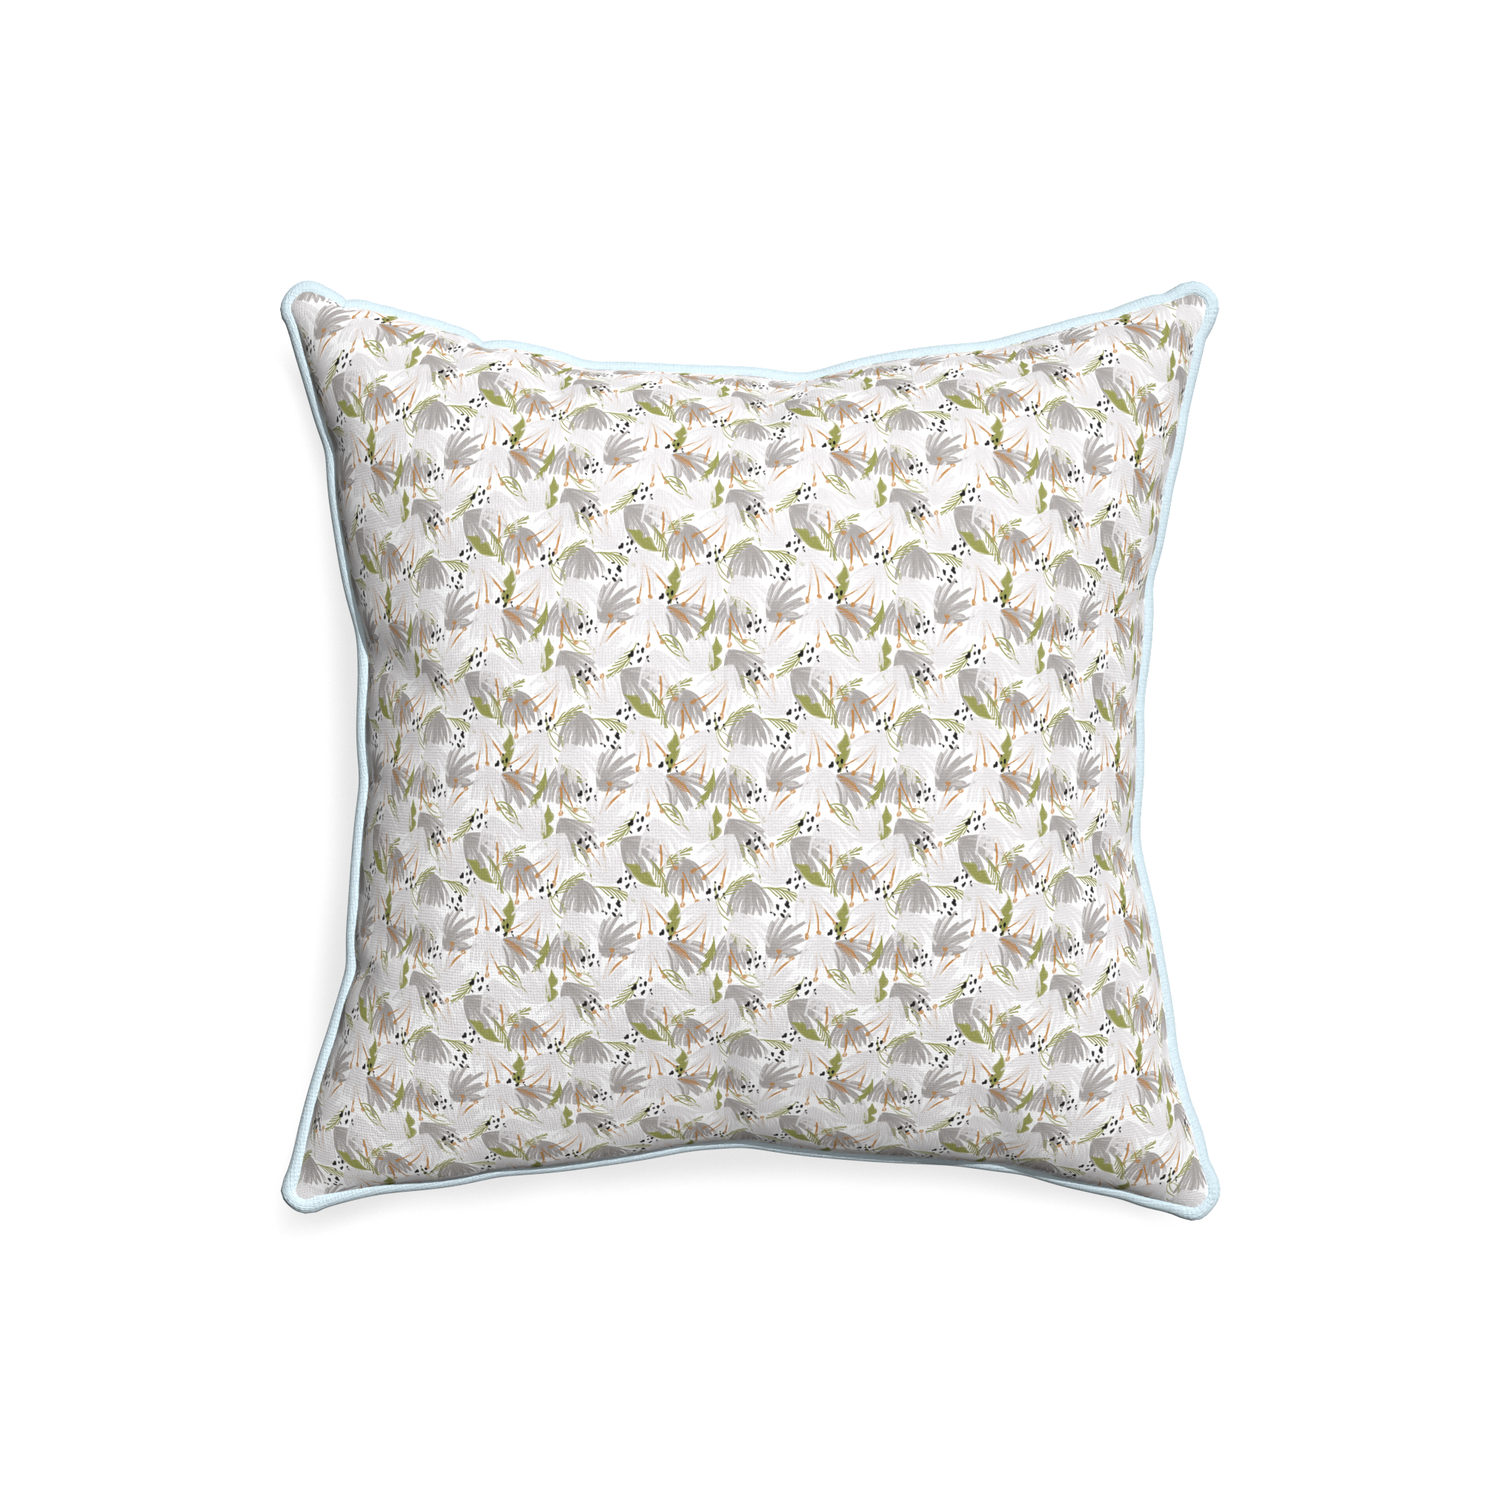 20-square eden grey custom grey floralpillow with powder piping on white background